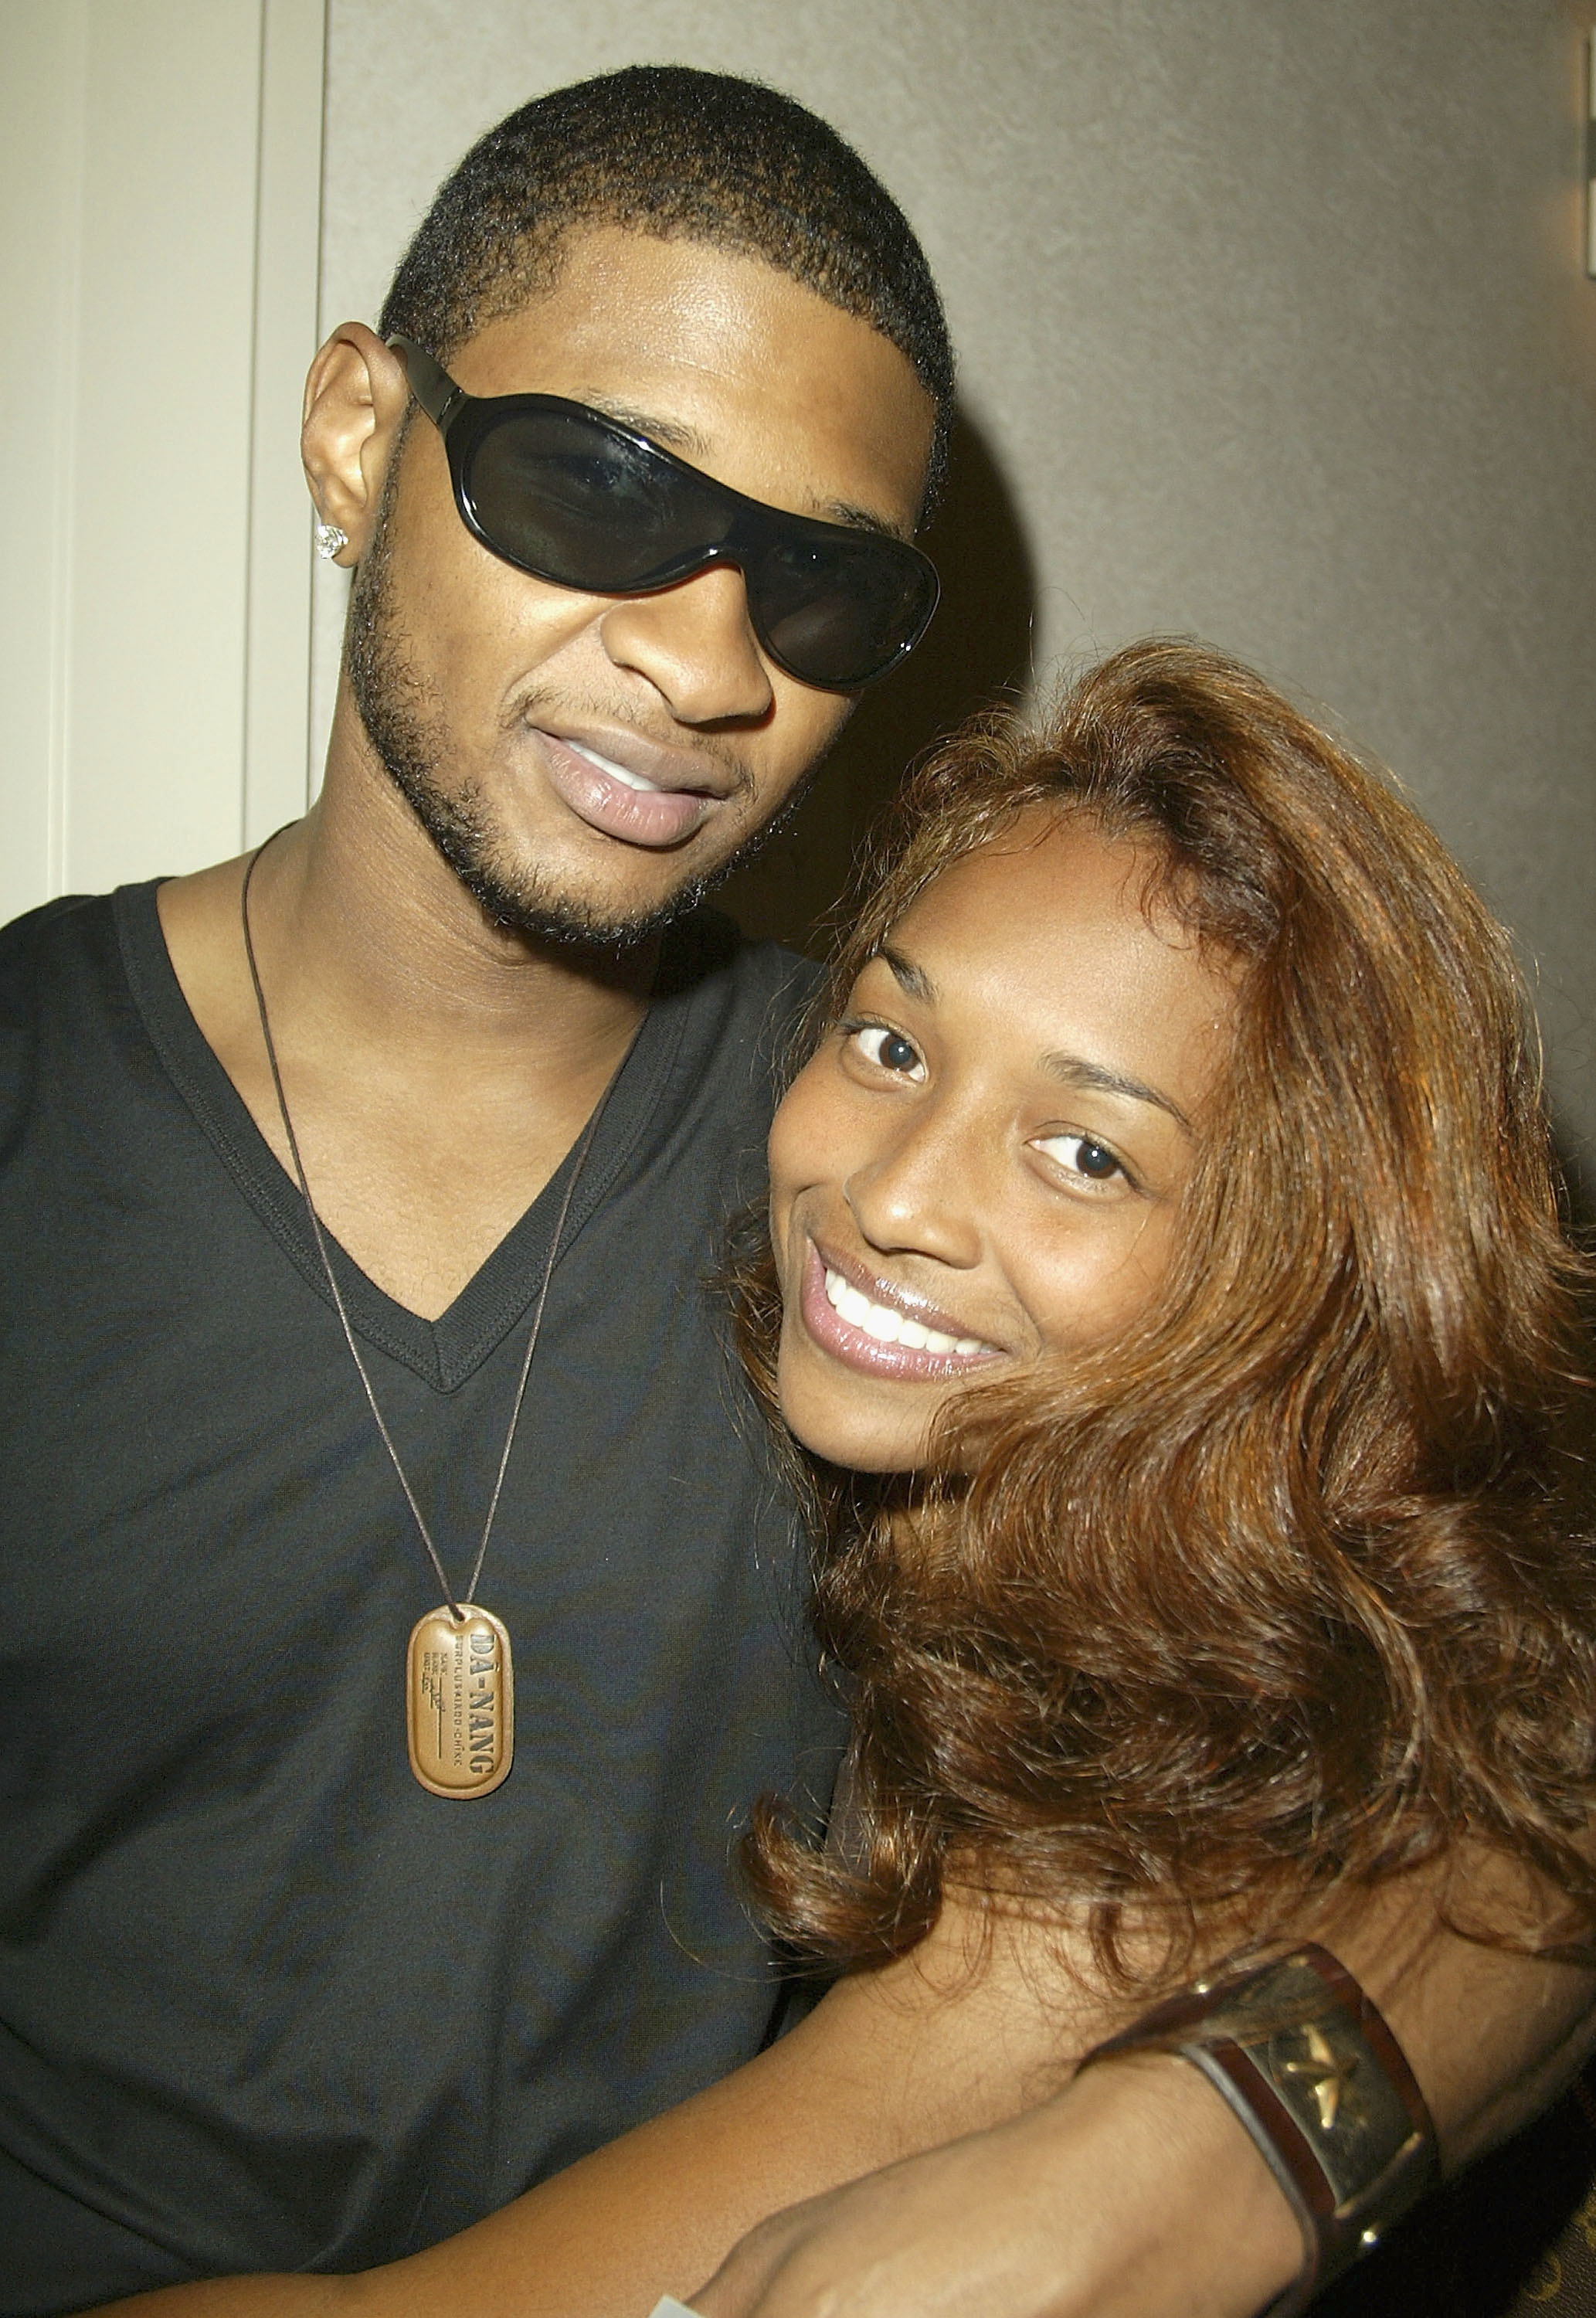 Usher smiling and wearing sunglasses and a V-neck top and Chilli smiling and embracing